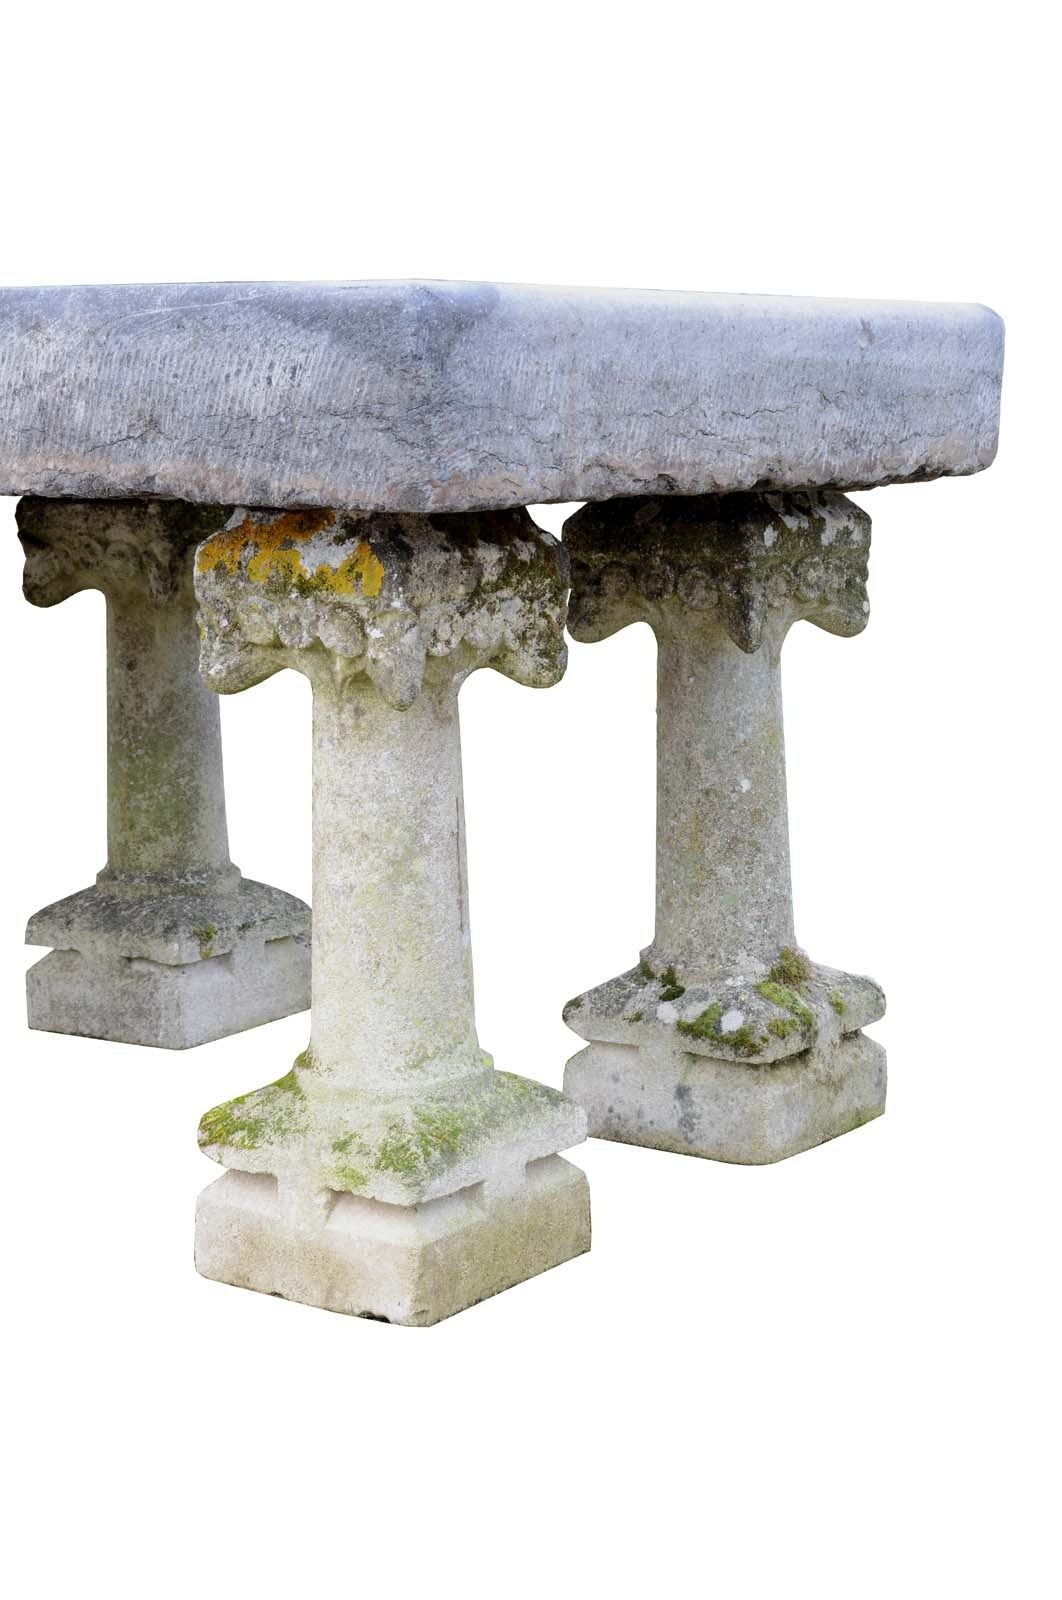 Important garden table maded of reclaimed architectural elements: monolithic blue stone tabletop and six French Art Nouveau period composite stone columns. # E6562.